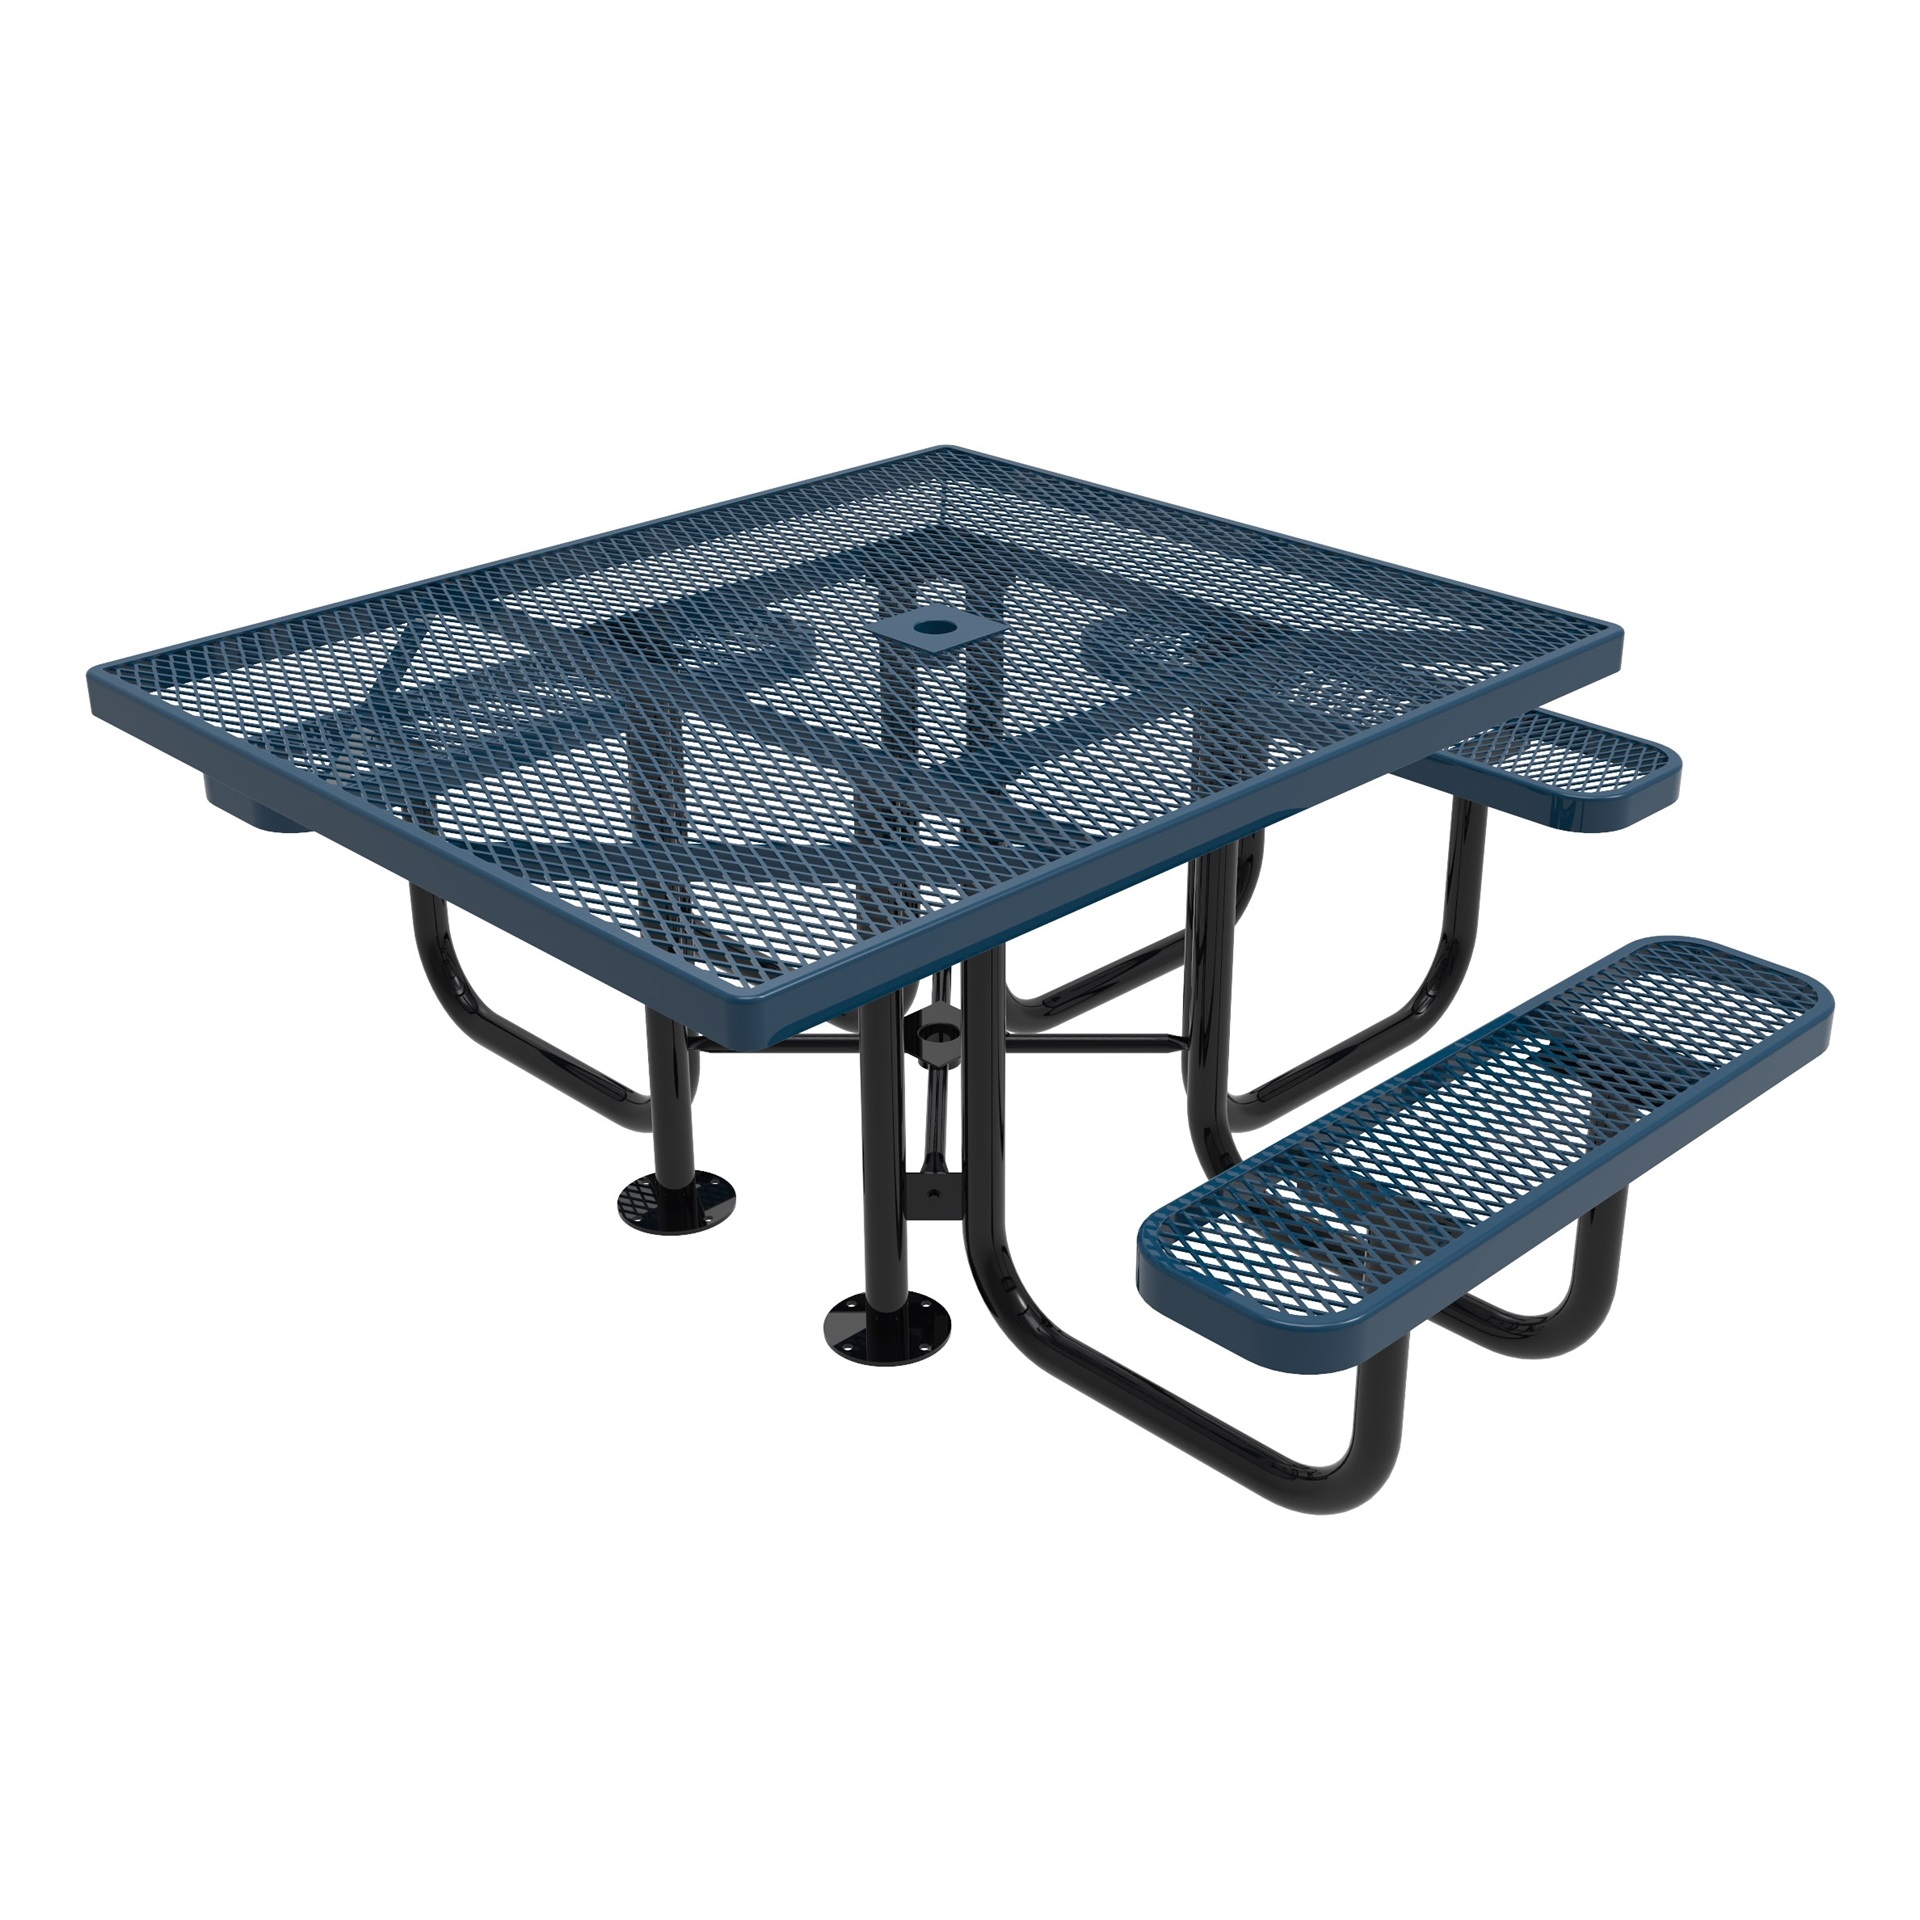 Outdoor_Square_AODA_Disability_Accessible_Picnic_Table-Single_source_supply_toronto_canada_